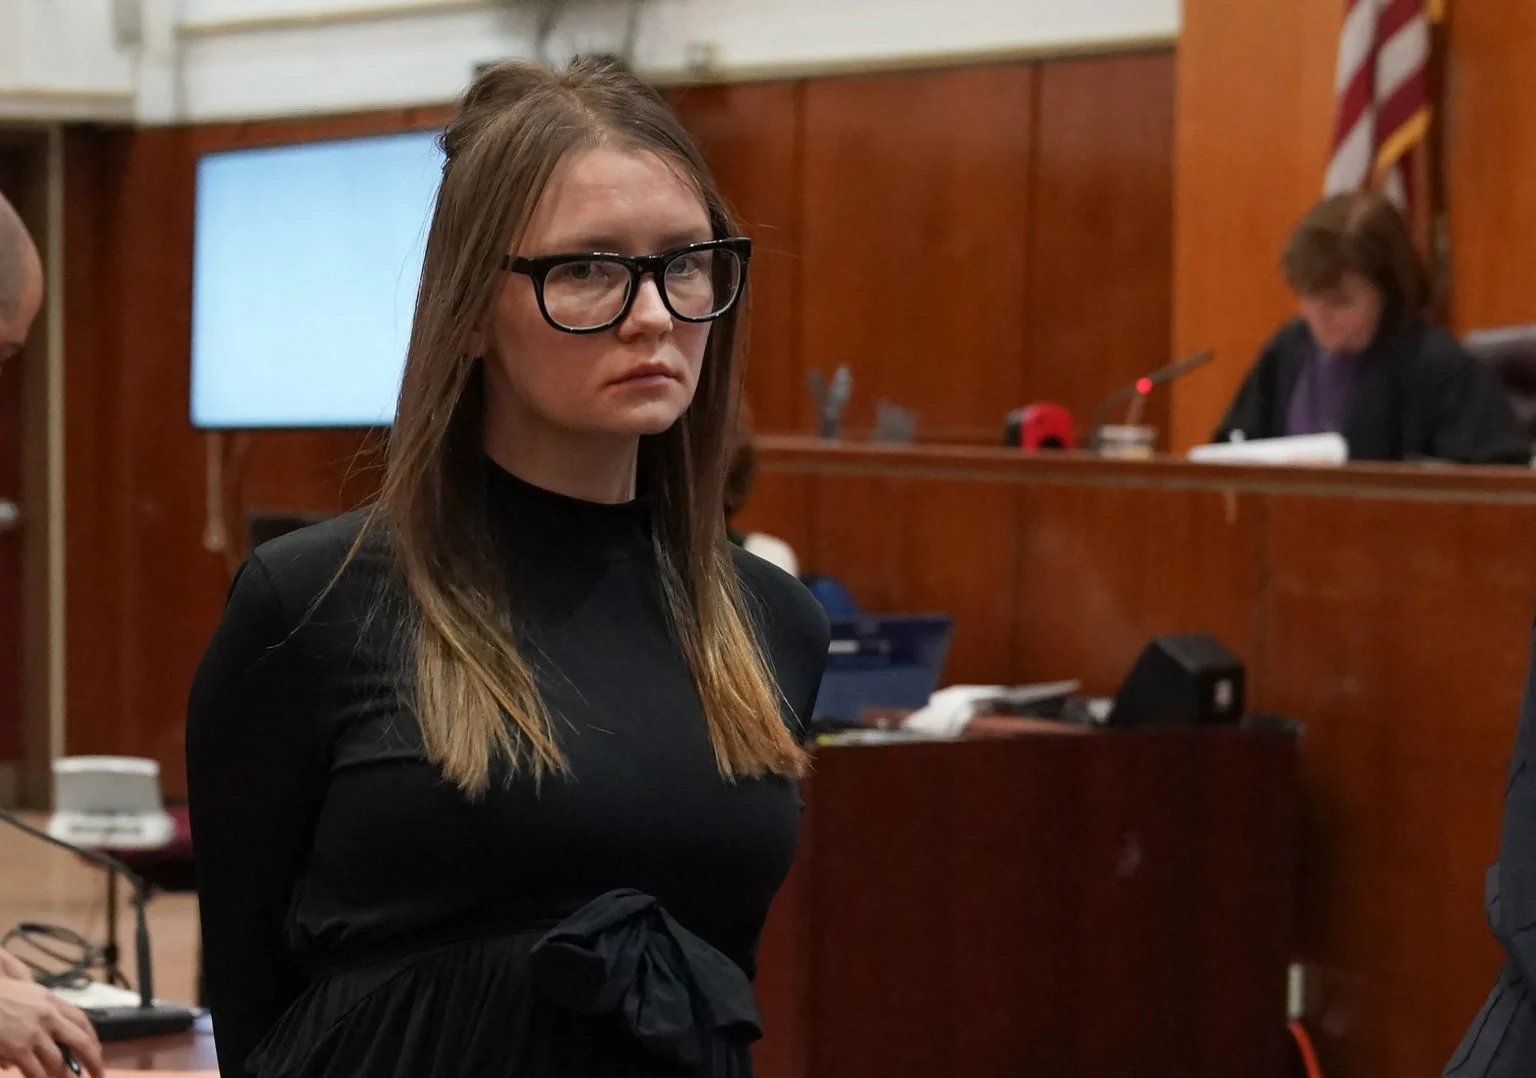 Phony heiress Anna Sorokin released from US immigration detention